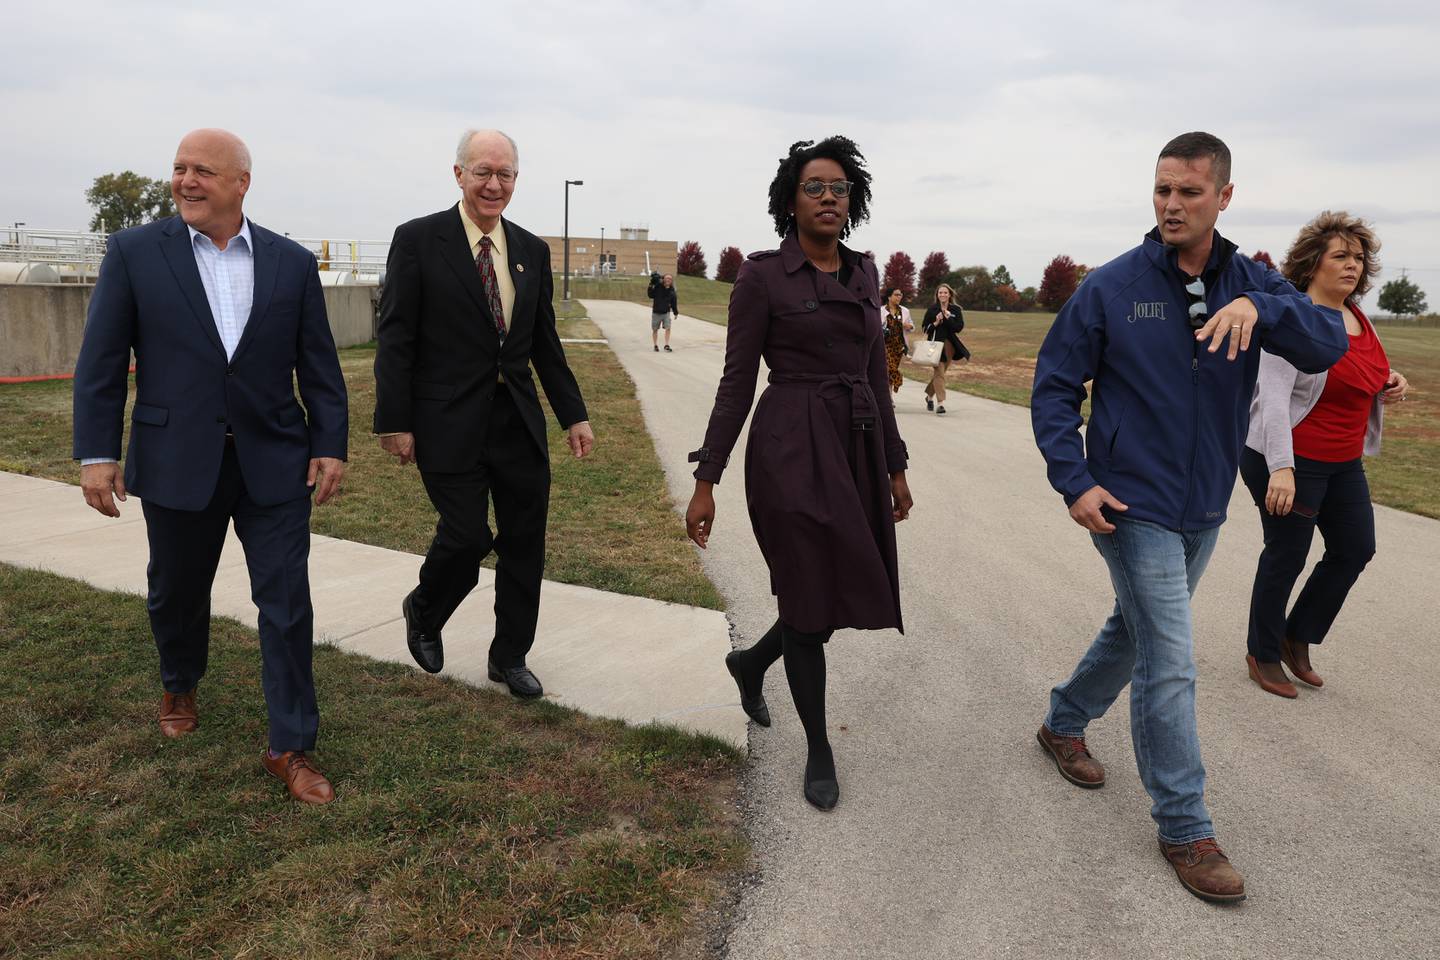 Senior Advisor to the President and White House Infrastructure Coordinator, Mitch Landrieu, left, Congressman Bill Foster and Congresswoman Lauren Underwood get a tour of the City of Joliet Aux Sable Wastewater Treatment Plant by Nick Gornick, Deputy Director of Plant Operations, during a press conference announcing new funding from the Bipartisan Infrastructure Law for the state of Illinois on Tuesday.